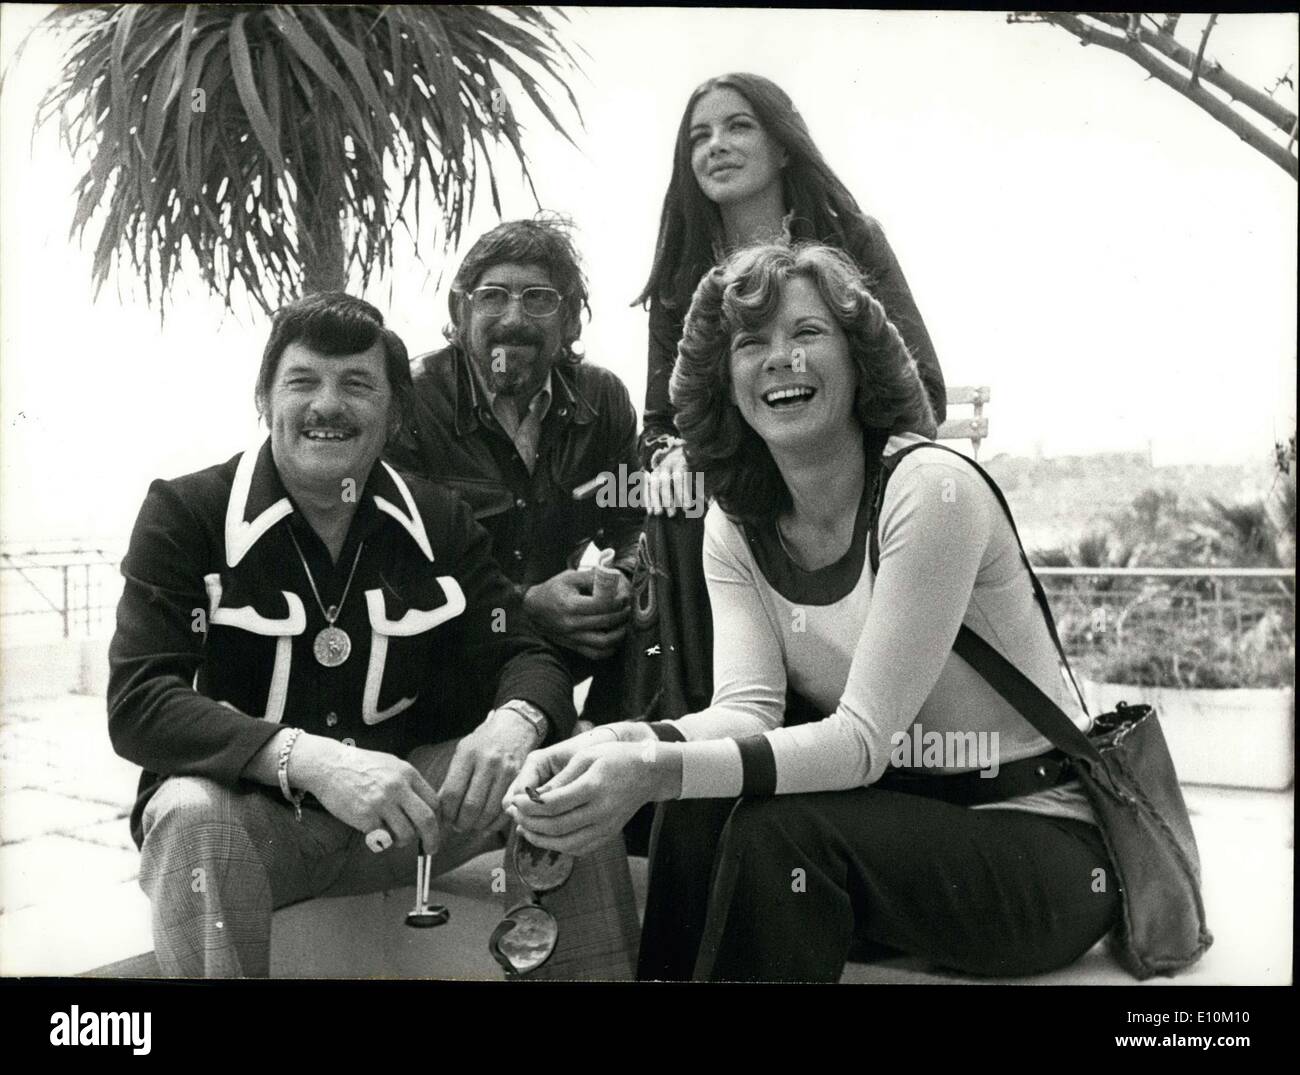 May 22, 1973 - Here are the comedian Willie Lamothe, director Gilles Carles, and comedians Carole Laure and Denise Filiatrault in Cannes. Stock Photo